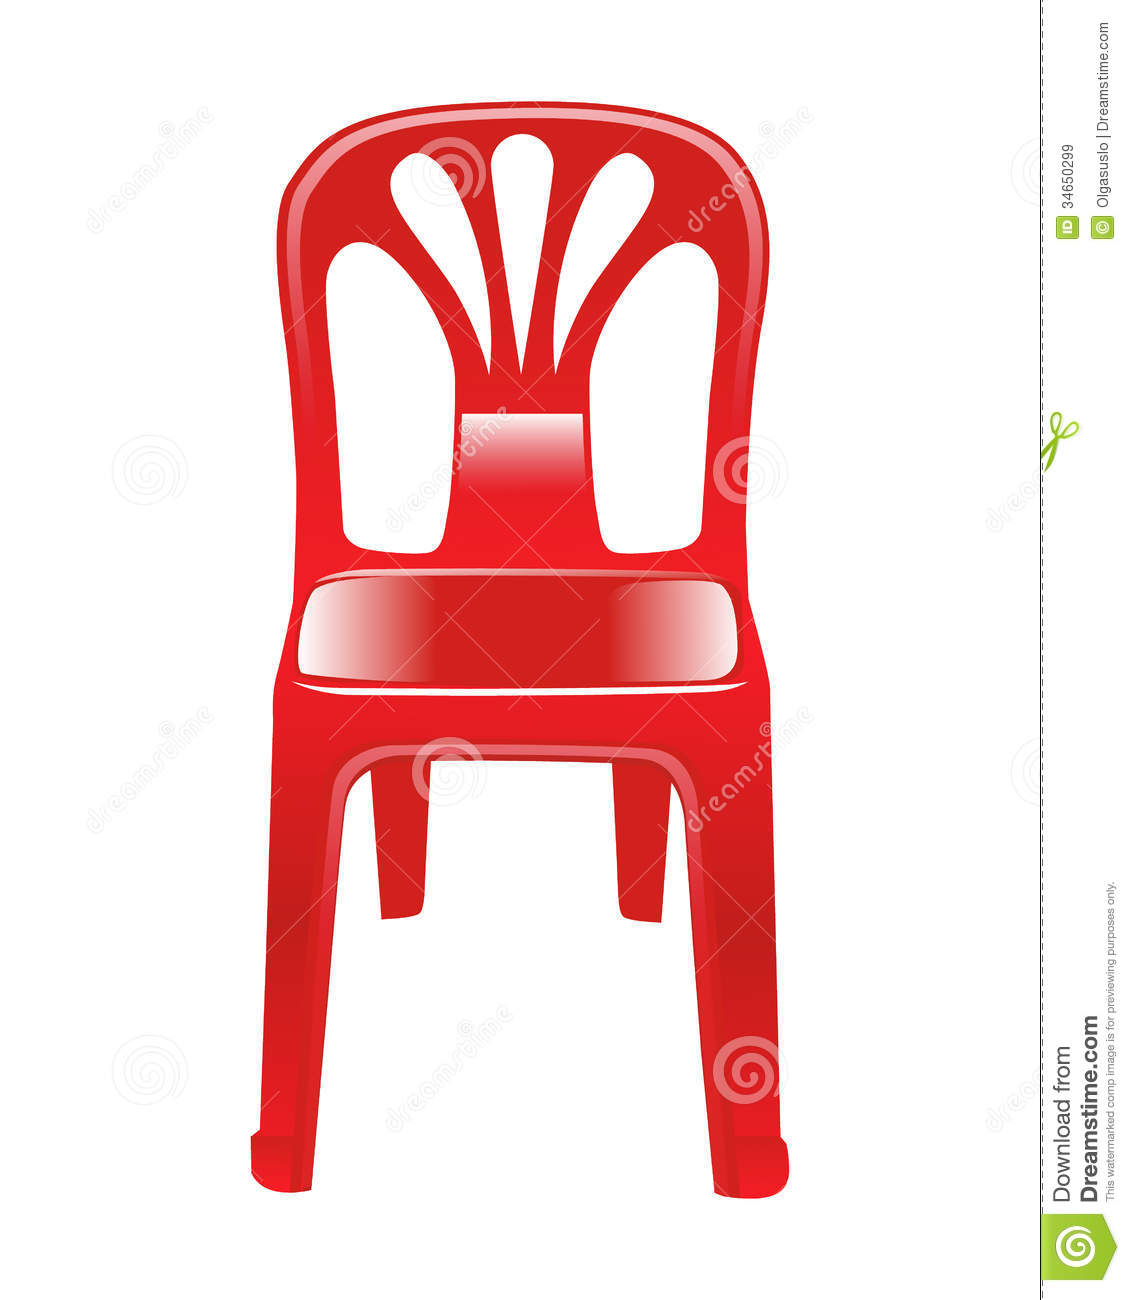 yellow chair clipart - photo #49